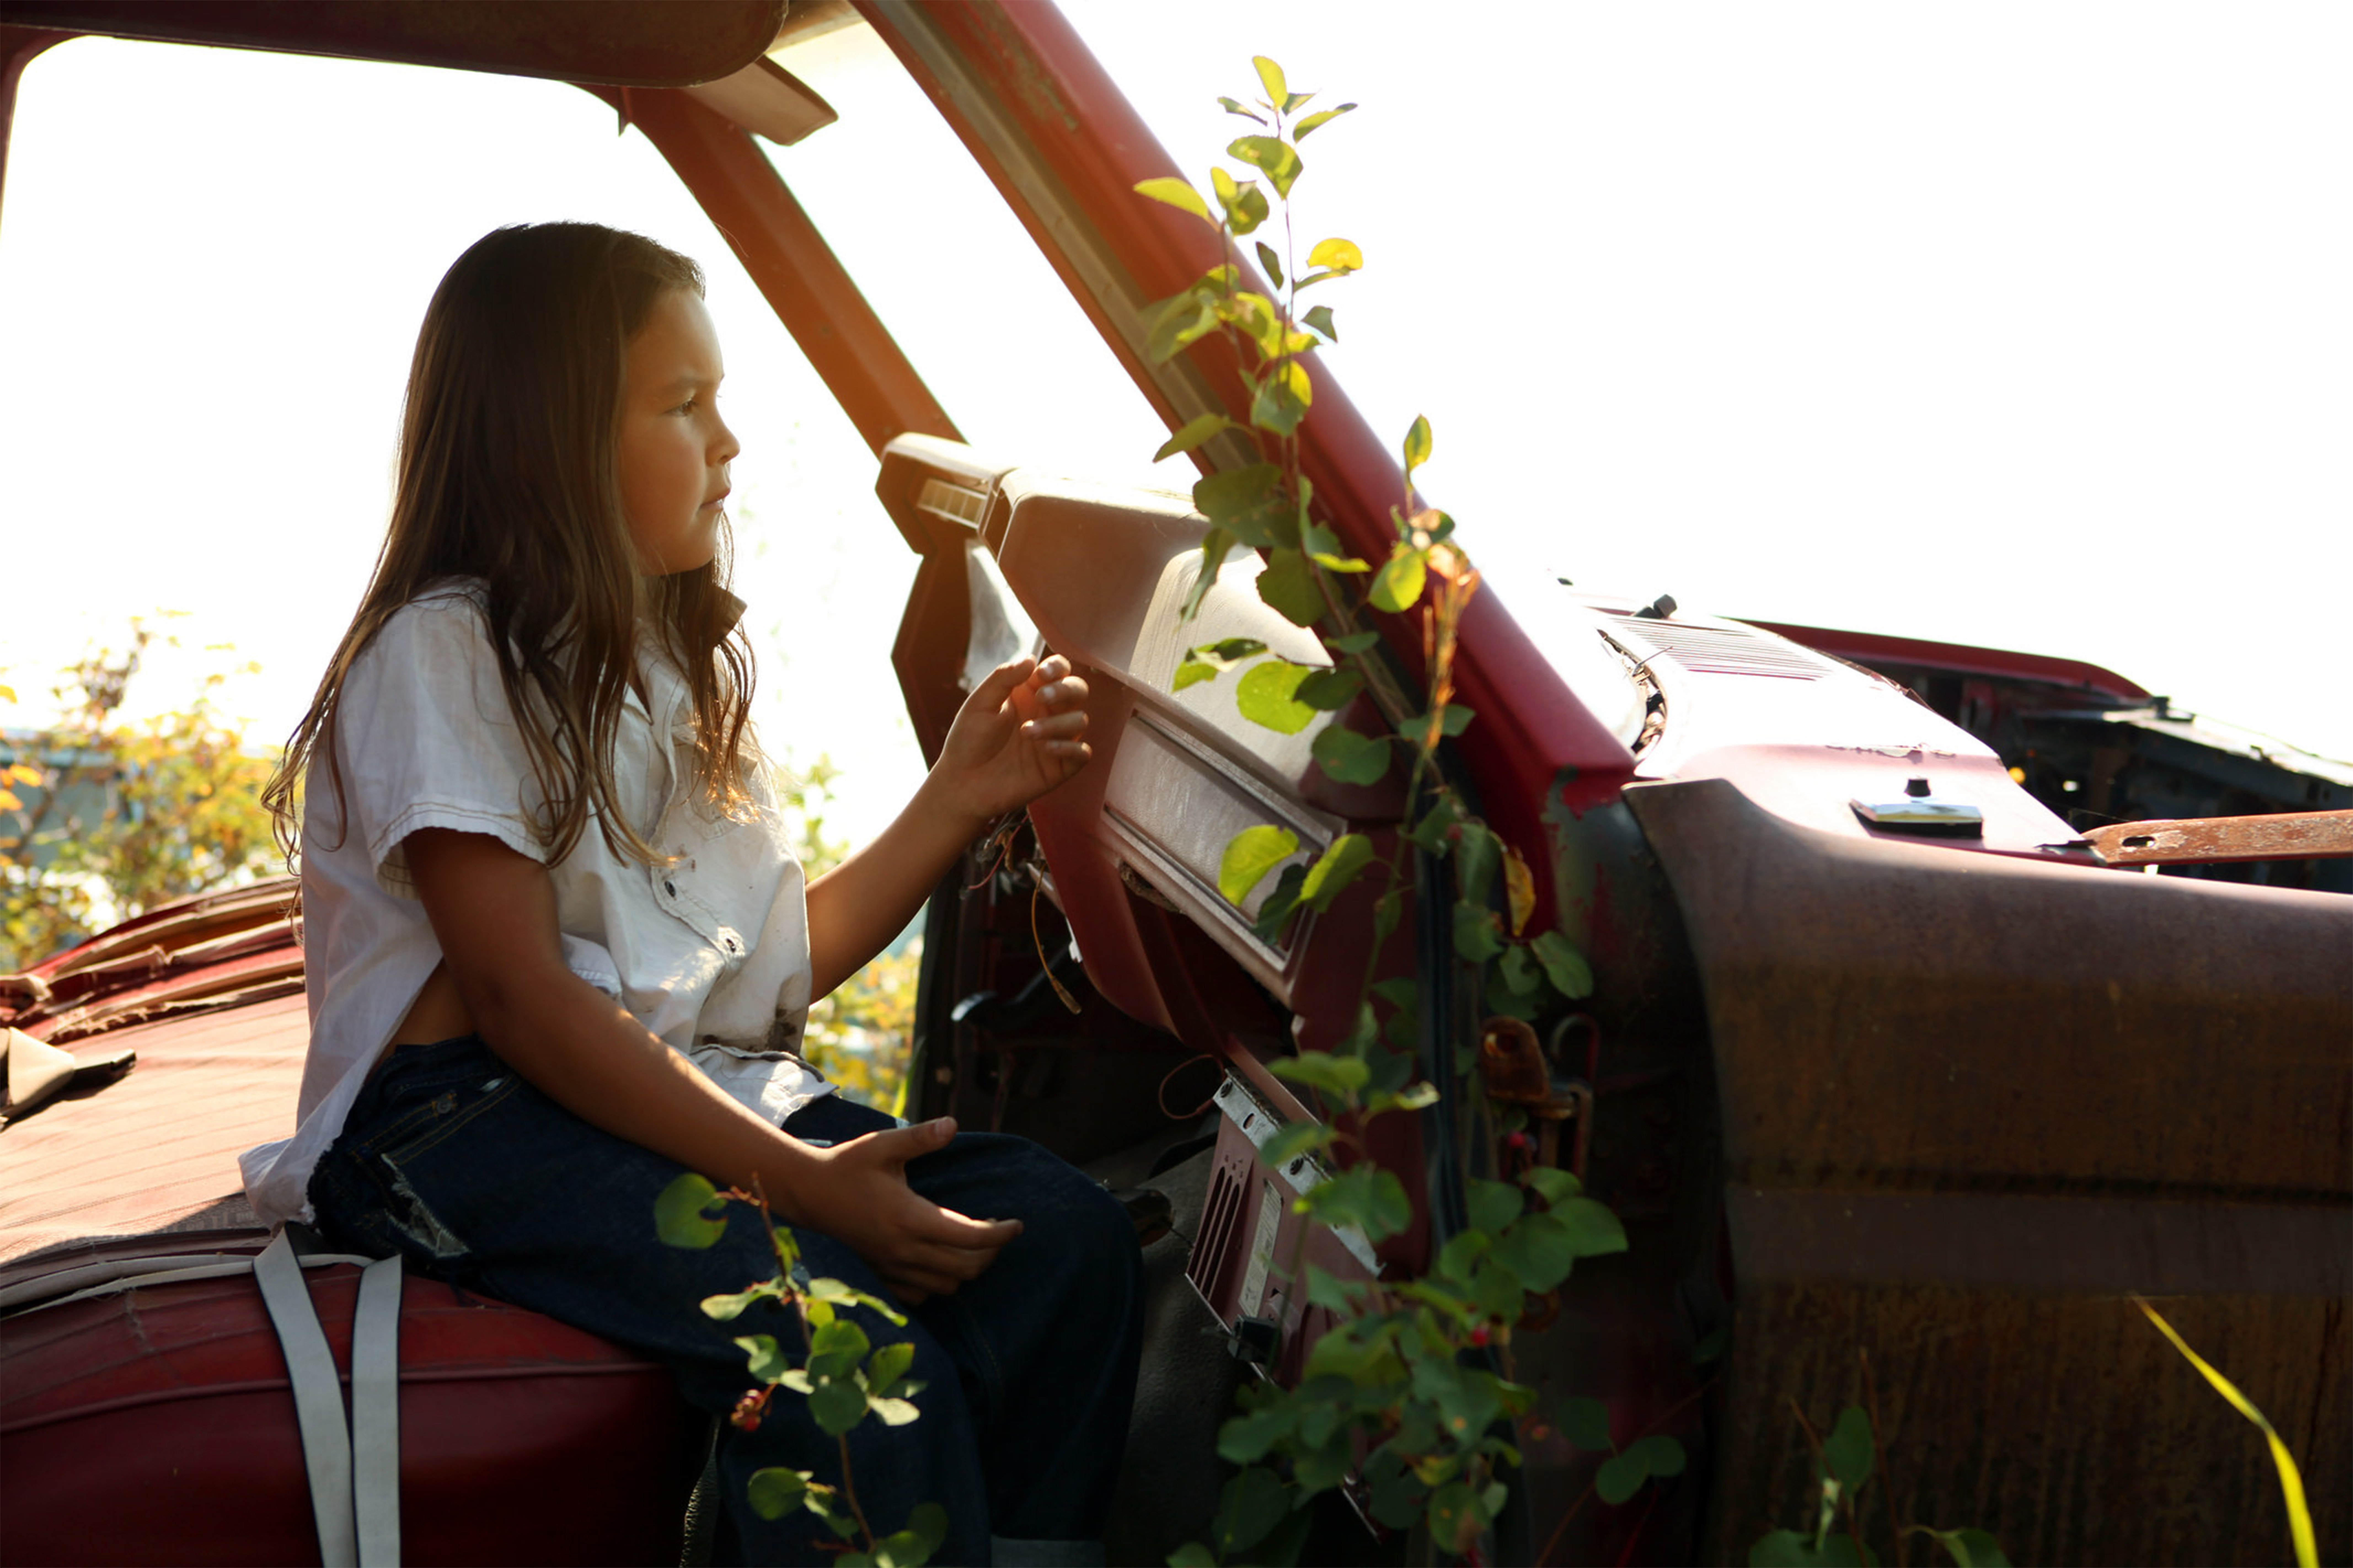 Elias Louie sits in an abandoned car in a 'car cemetery' on the Tl'etinqox reserve while filming 'Clouds of Autumn'.